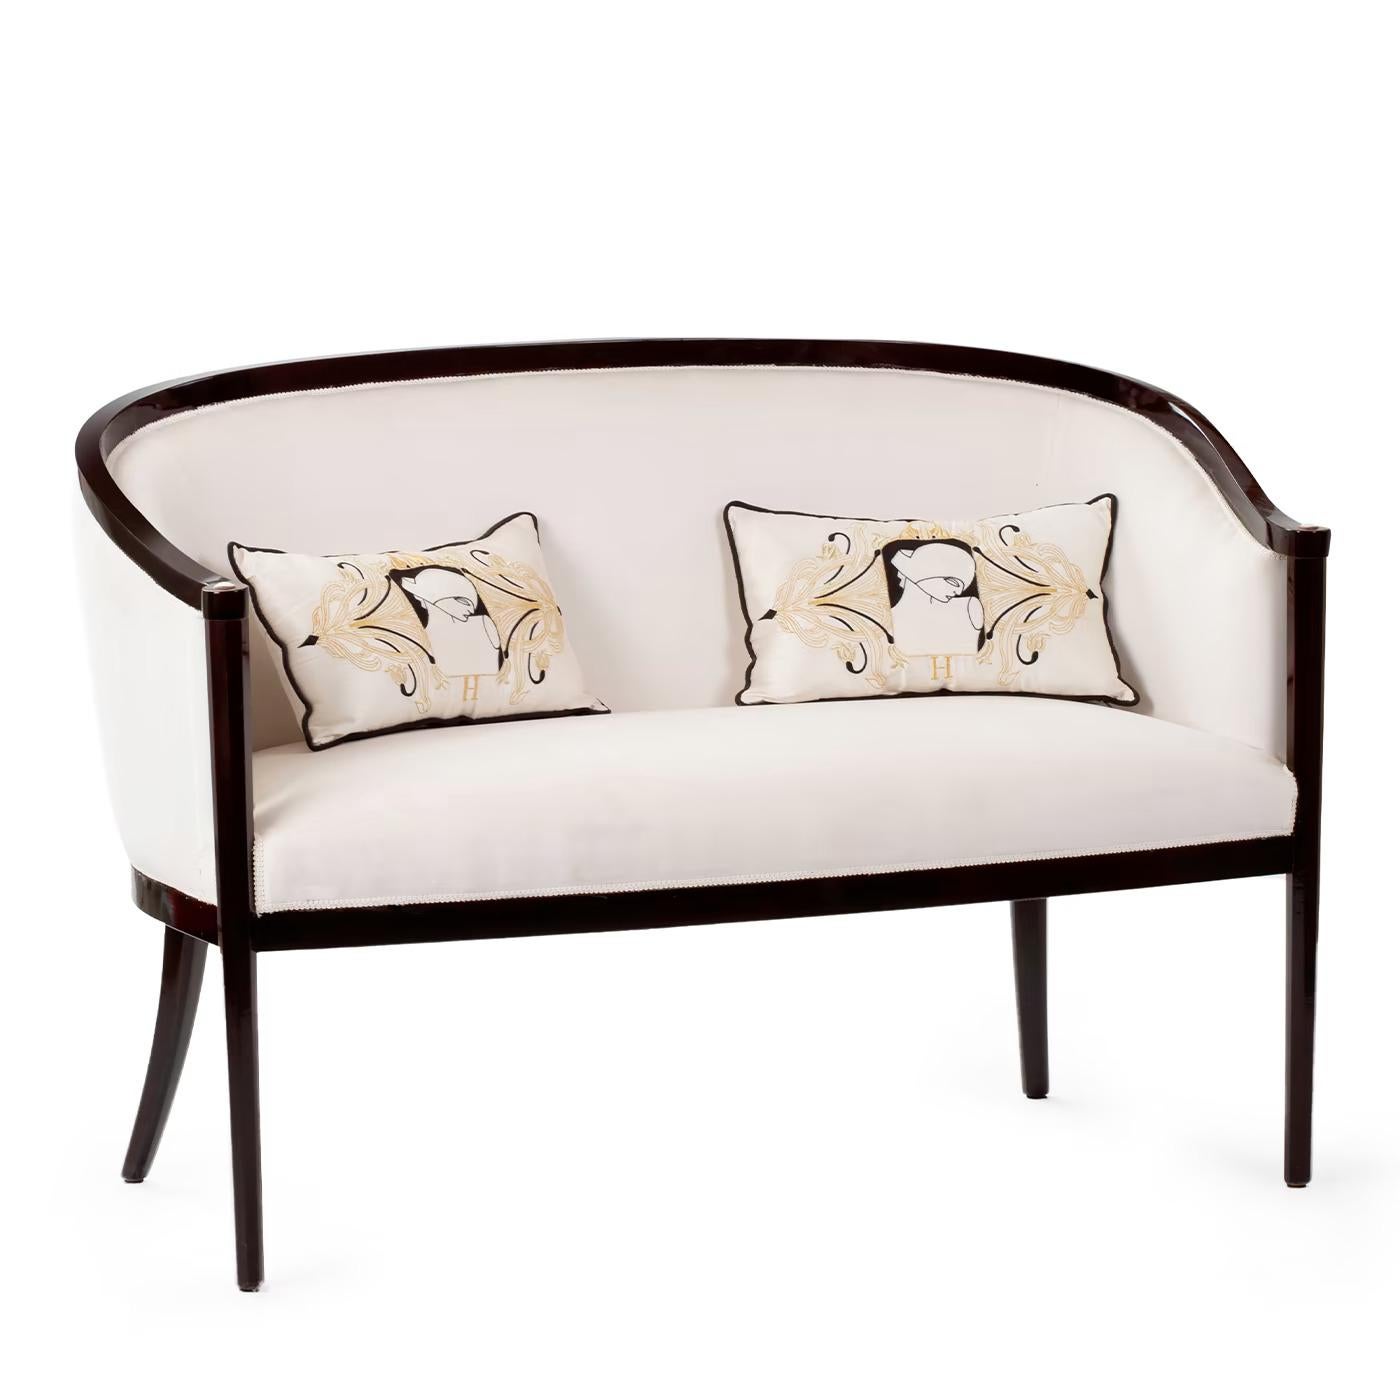 Inspired by Art Deco sculptor Boris Lovet, this stupendous sofa features clean and sophisticated lines that will imbue a modern interior with refined elegance. Fashioned of black-lacquered wood, it is softly padded and upholstered with white velvet.